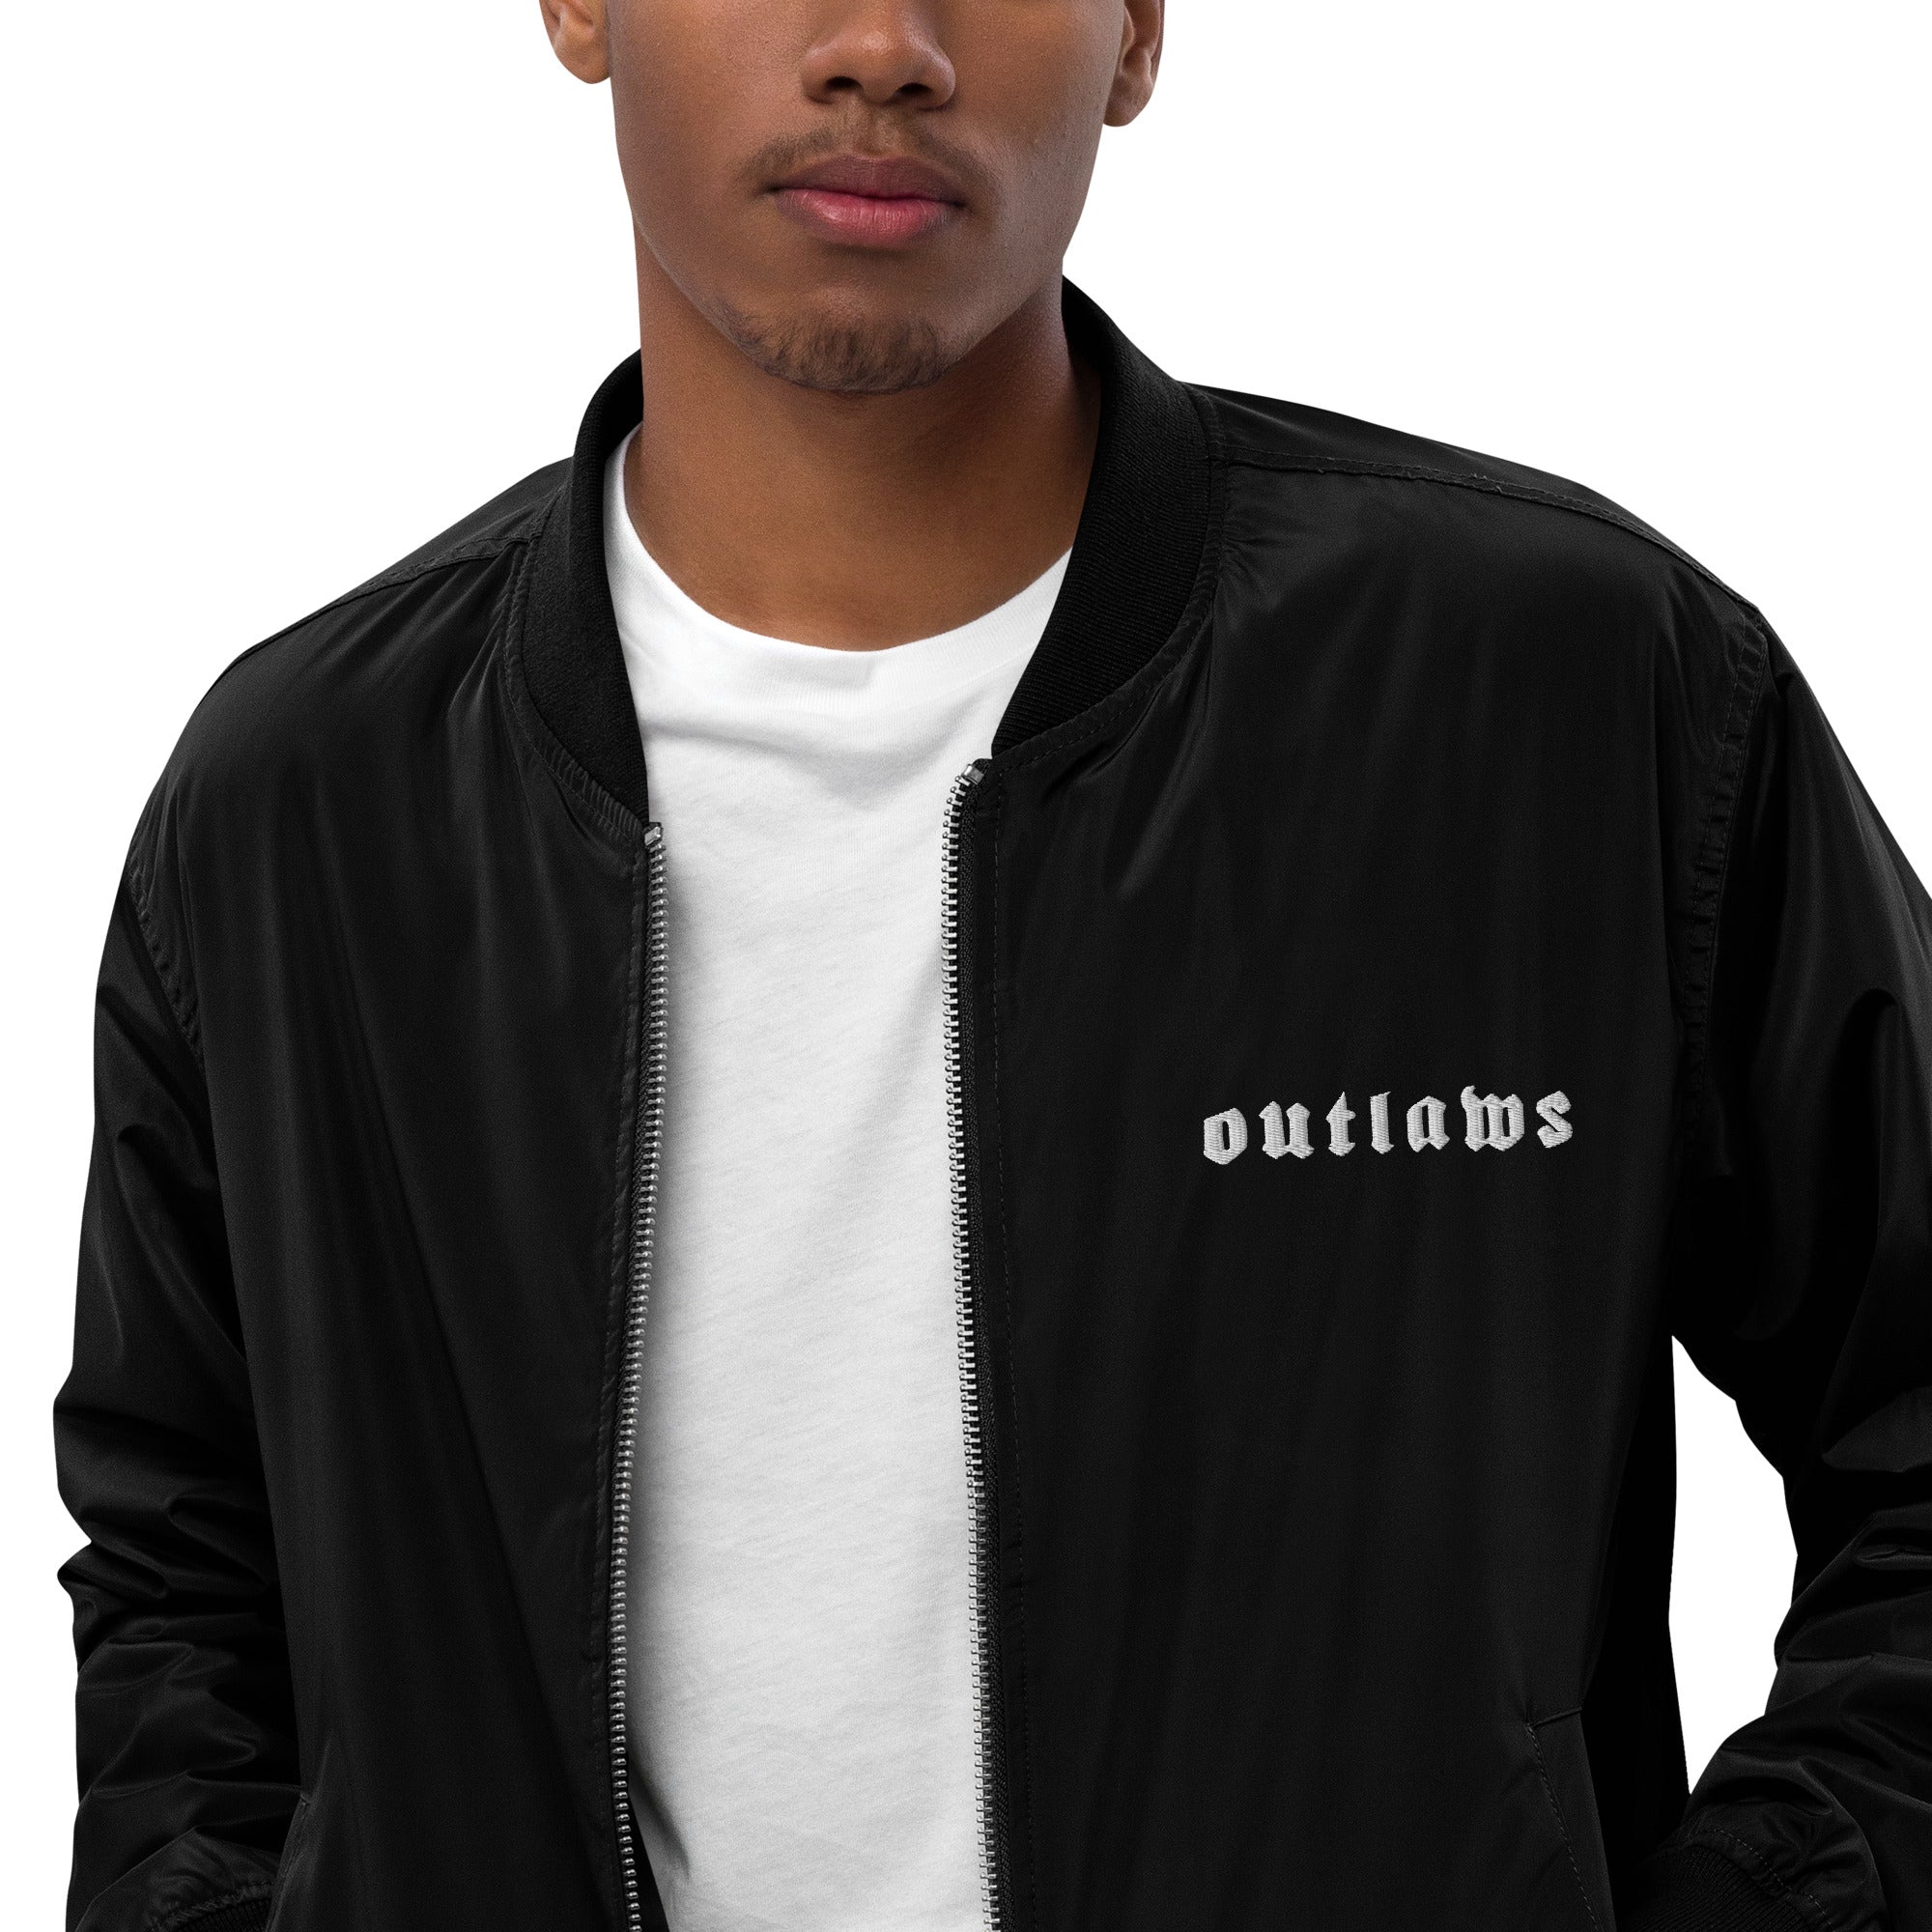 Outlaws Premium recycled bomber jacket